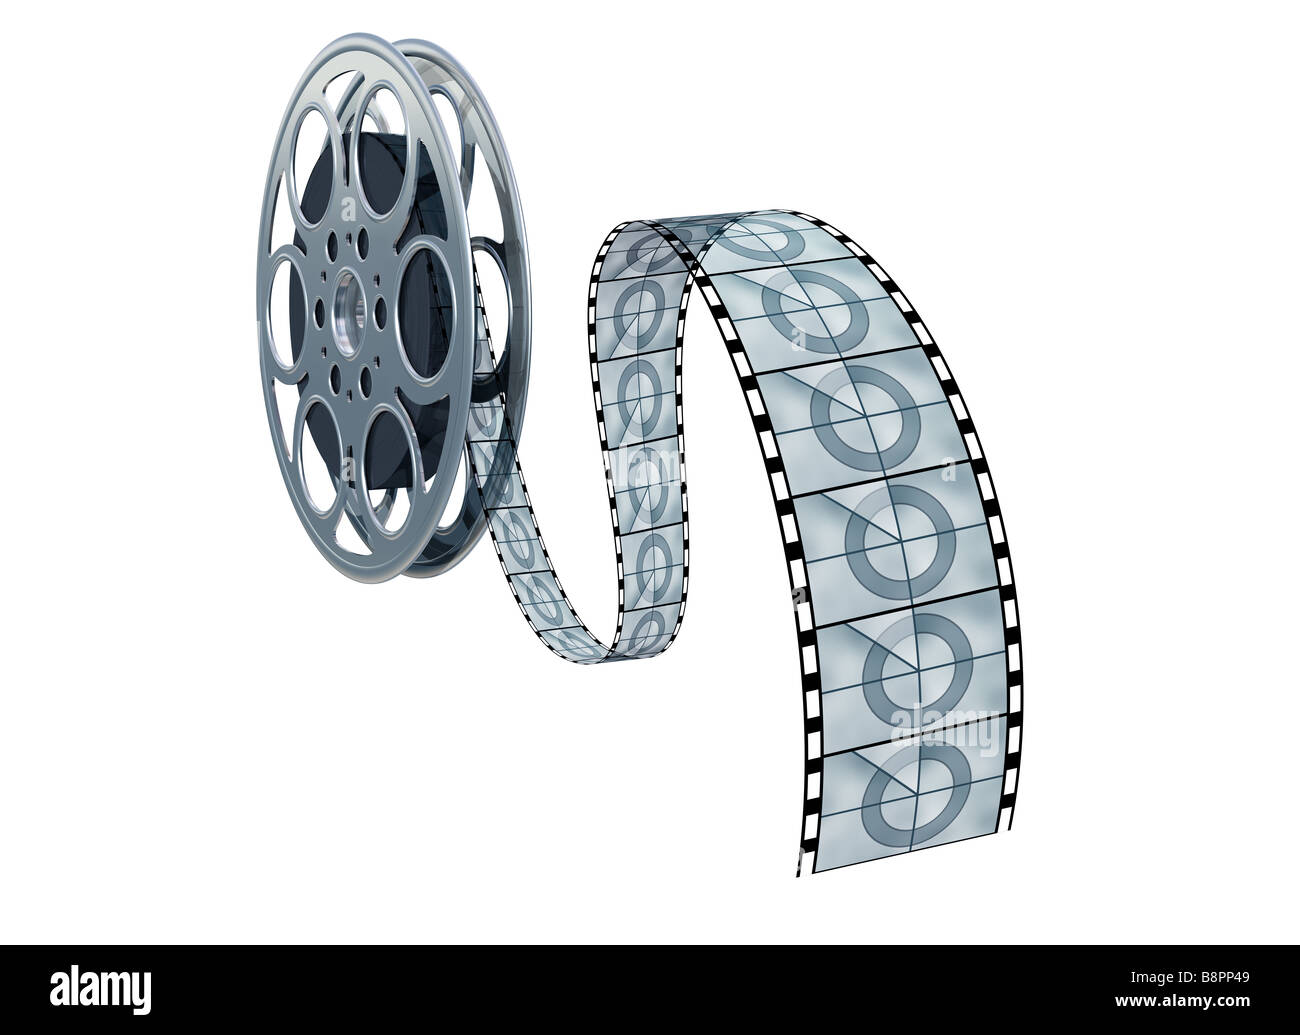 Isolated illustration of a movie reel and film Stock Photo